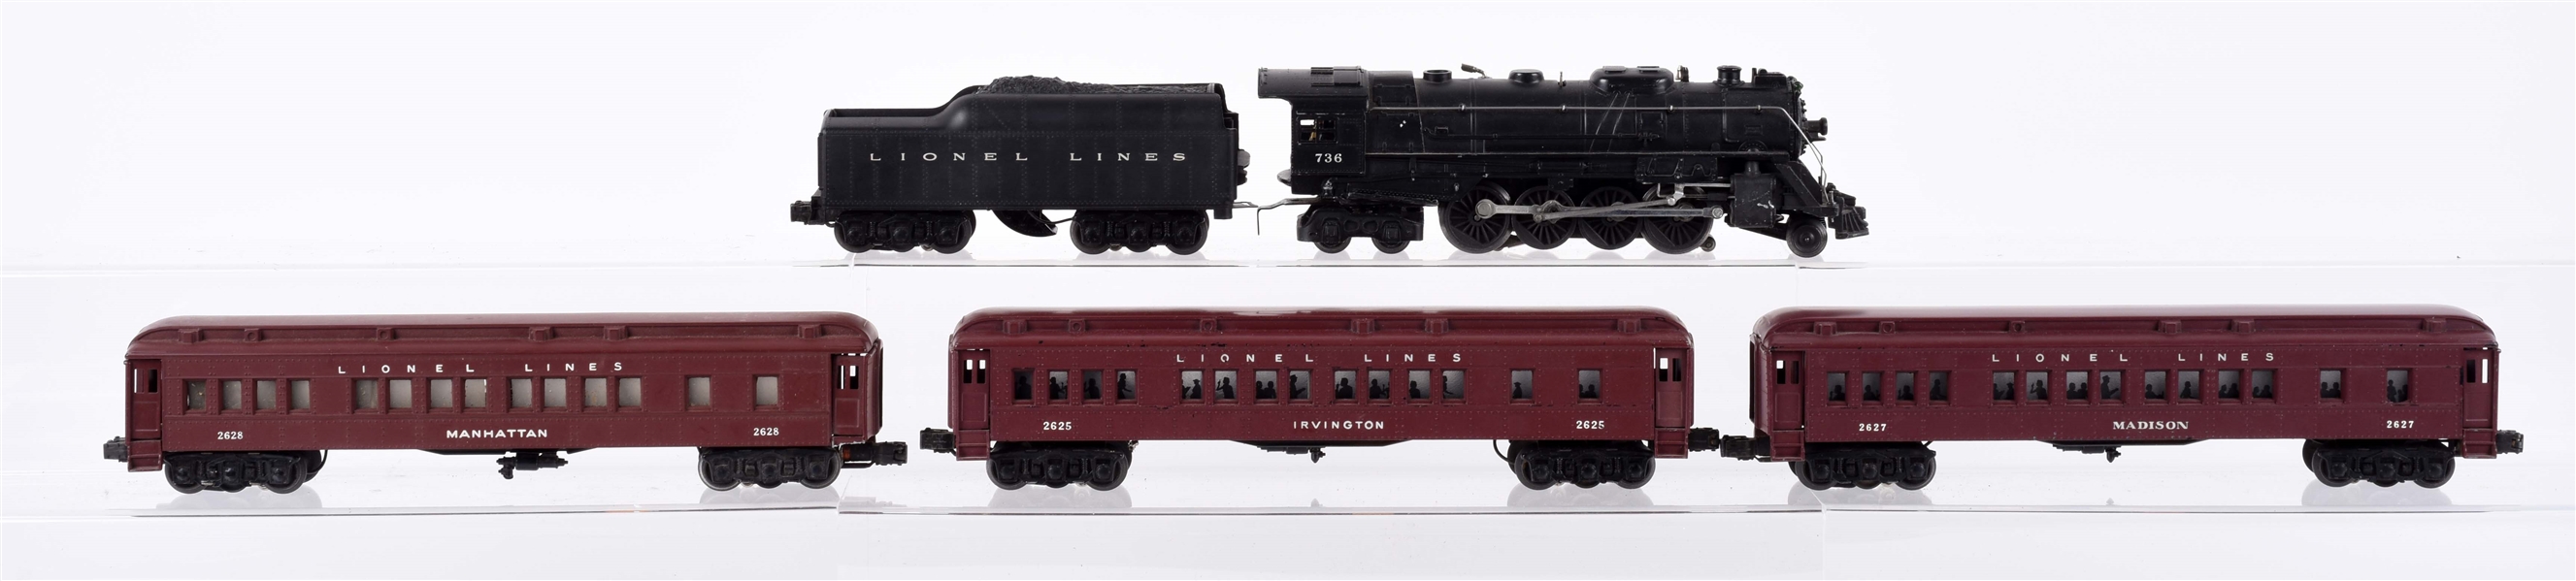 LOT OF 5: LIONEL 736 EARLY BERKSHIRE, & 3 DIFFERENT MADISON CARS. 